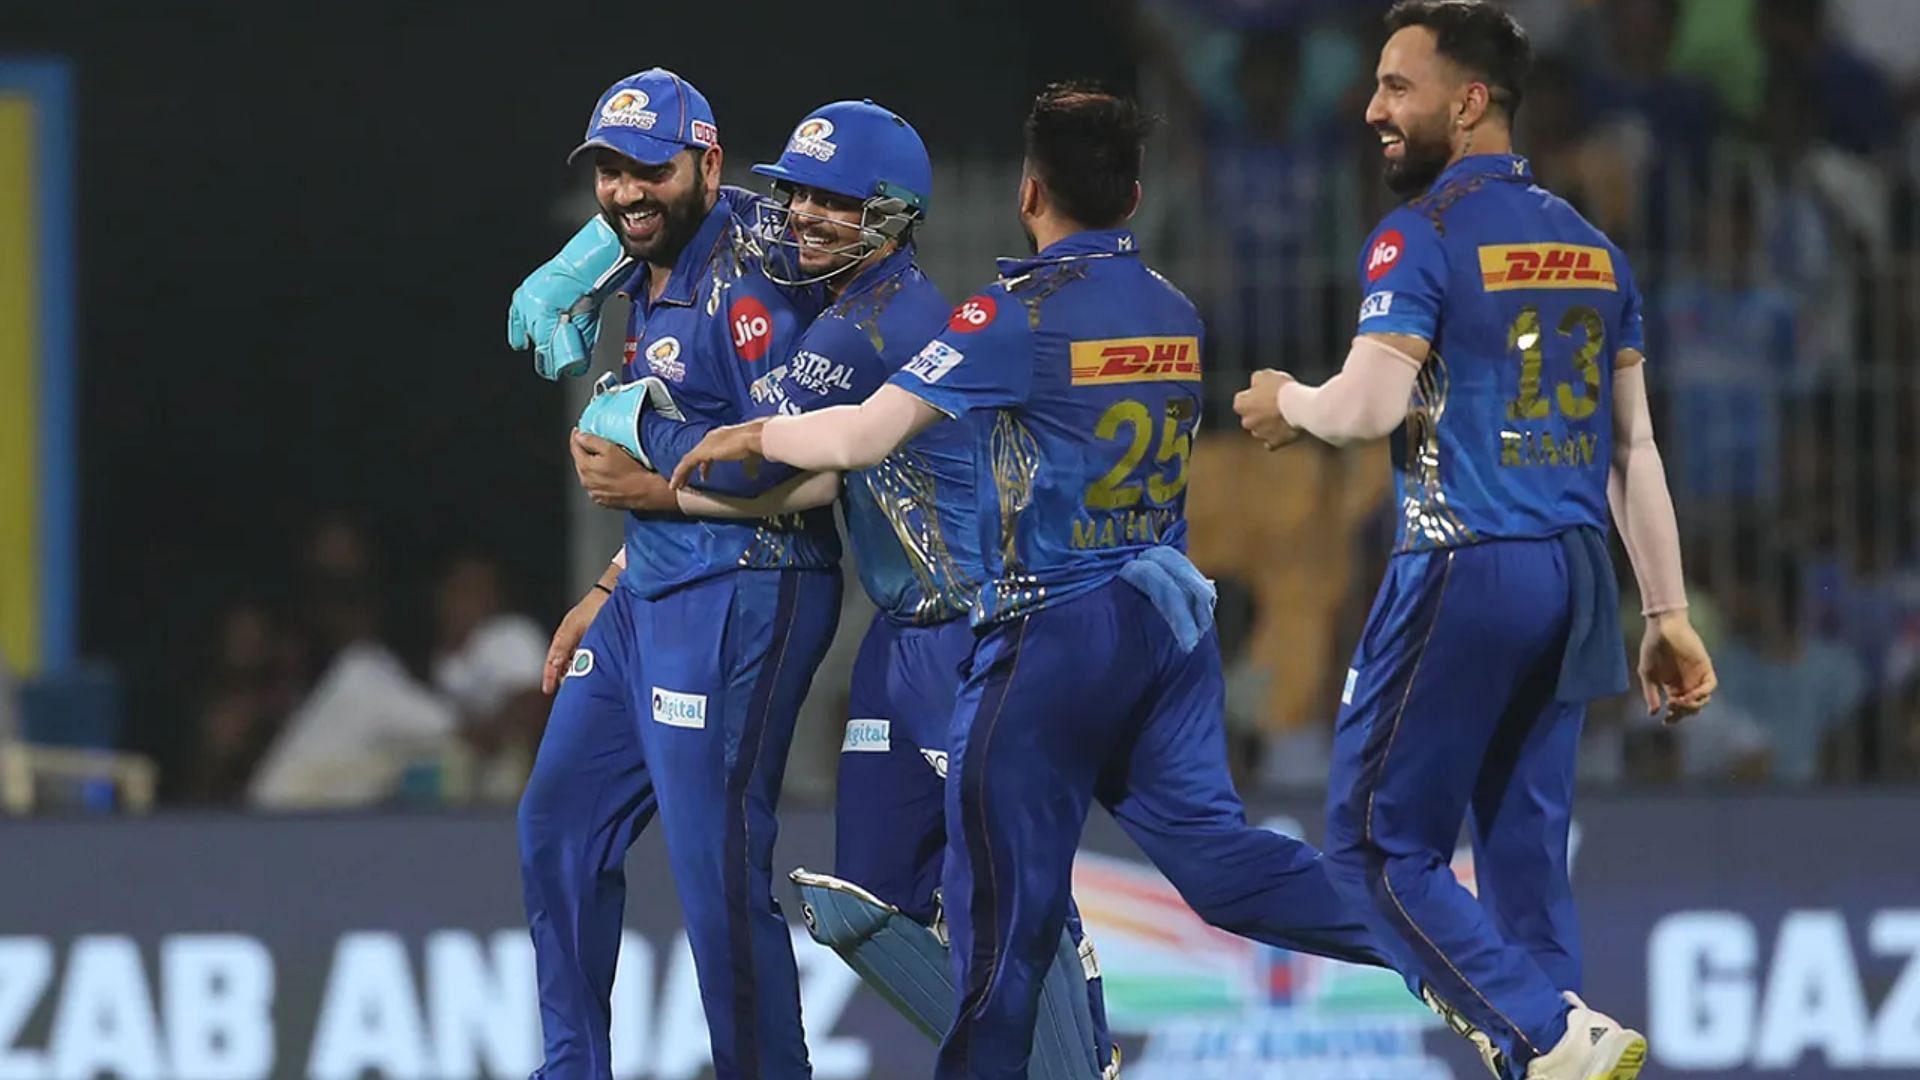 Rohit Sharma celebrates after affecting a direct hit to run out Krishnappa Gowtham (P.C.:iplt20.com)